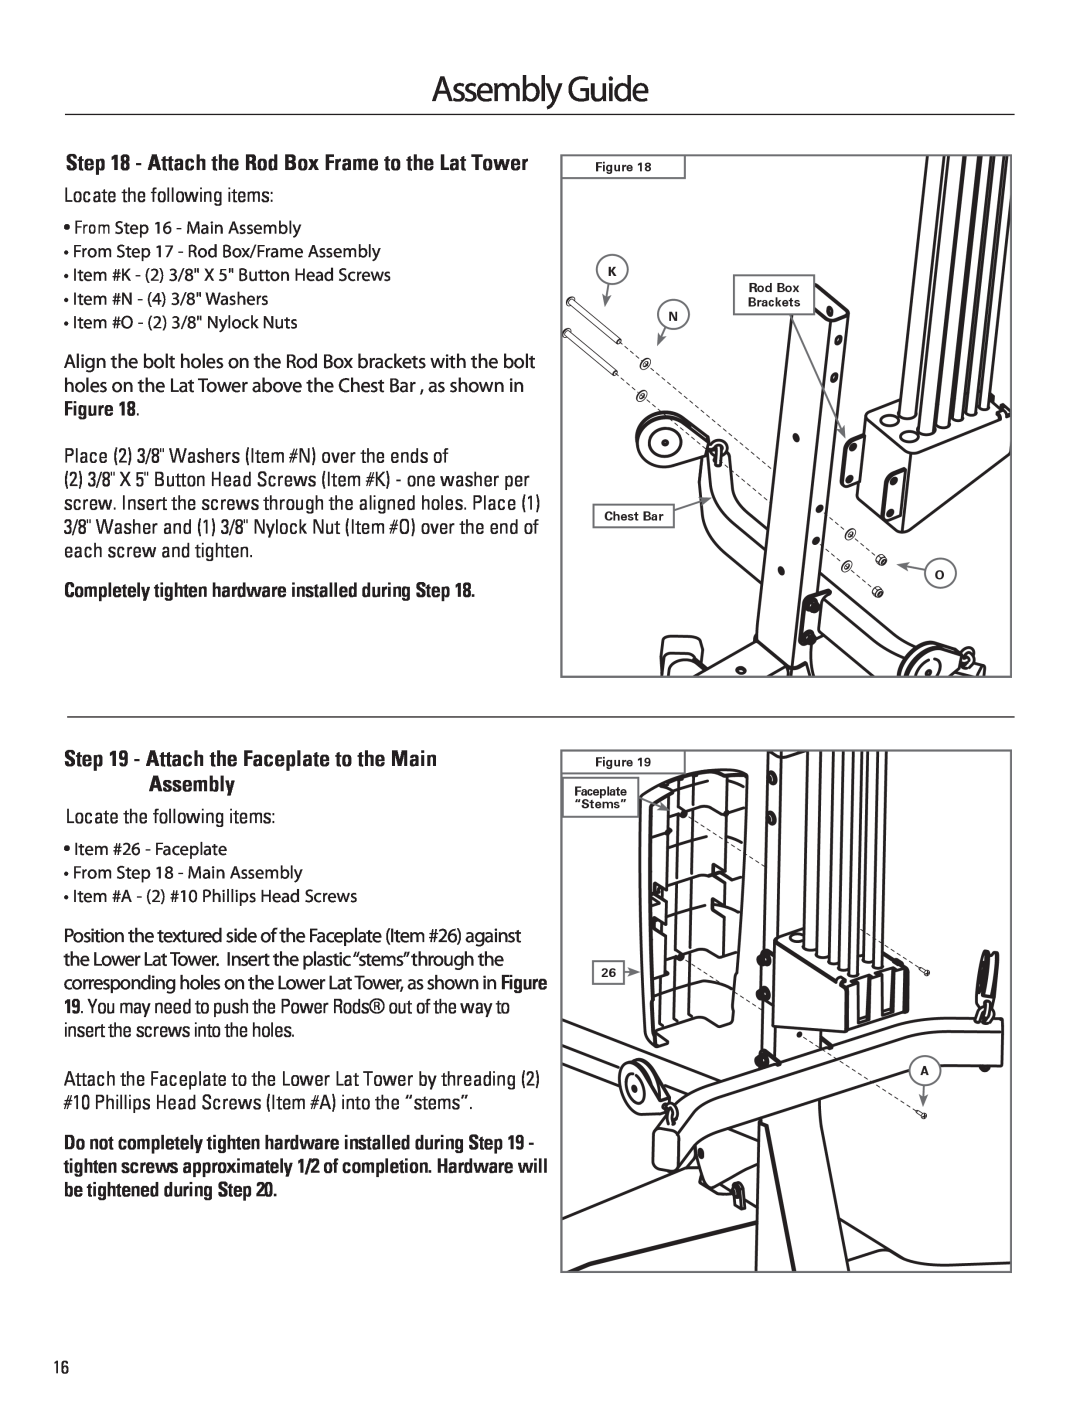 Bowflex 001-6961 manual Attach the Faceplate to the Main, Assembly Guide, Attach the Rod Box Frame to the Lat Tower 